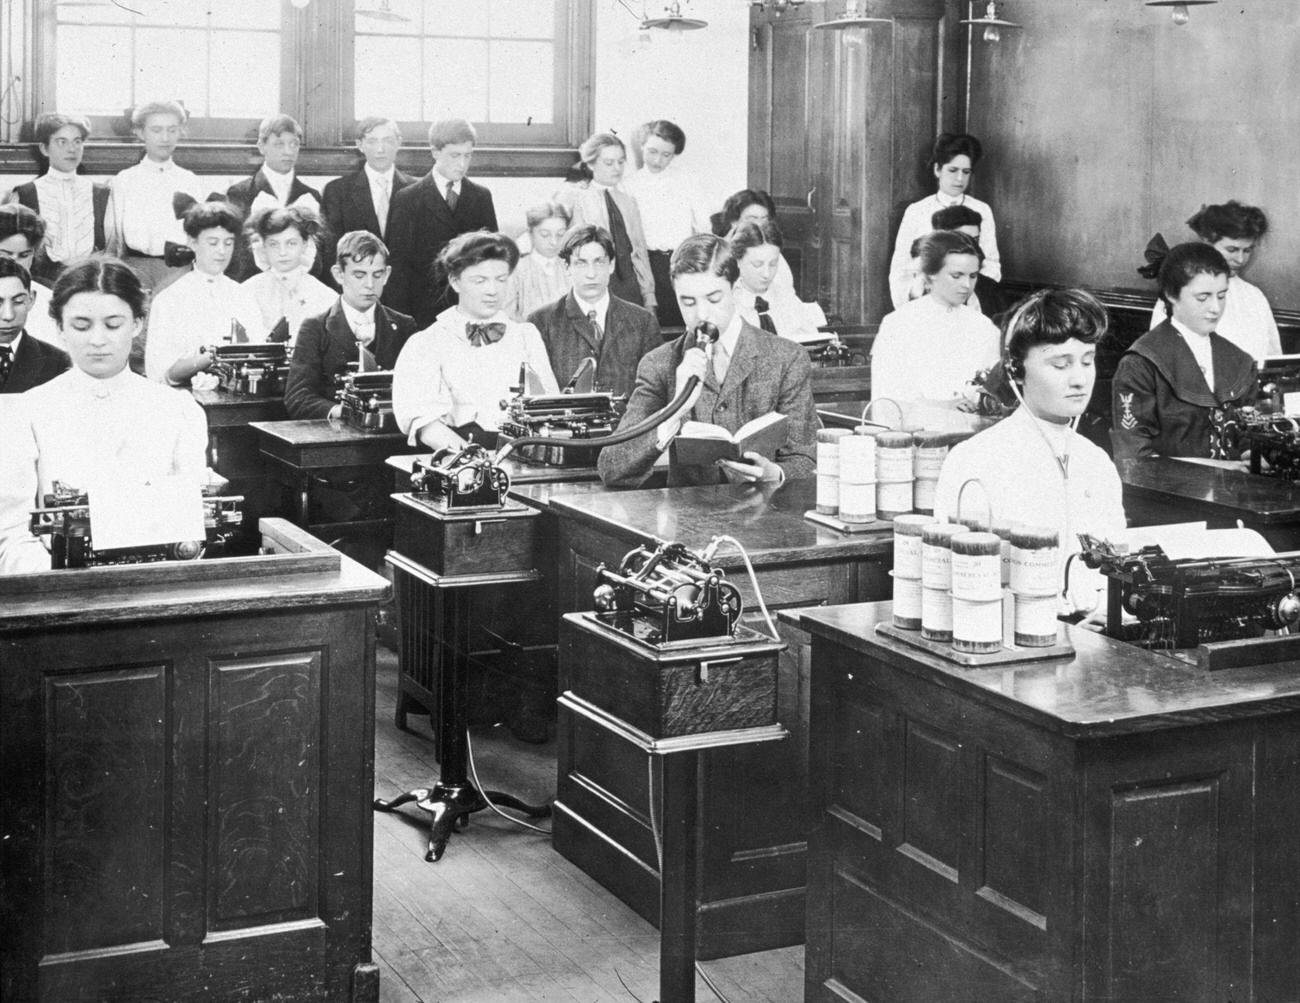 Typing class at Bryant School, New York City, 1906.